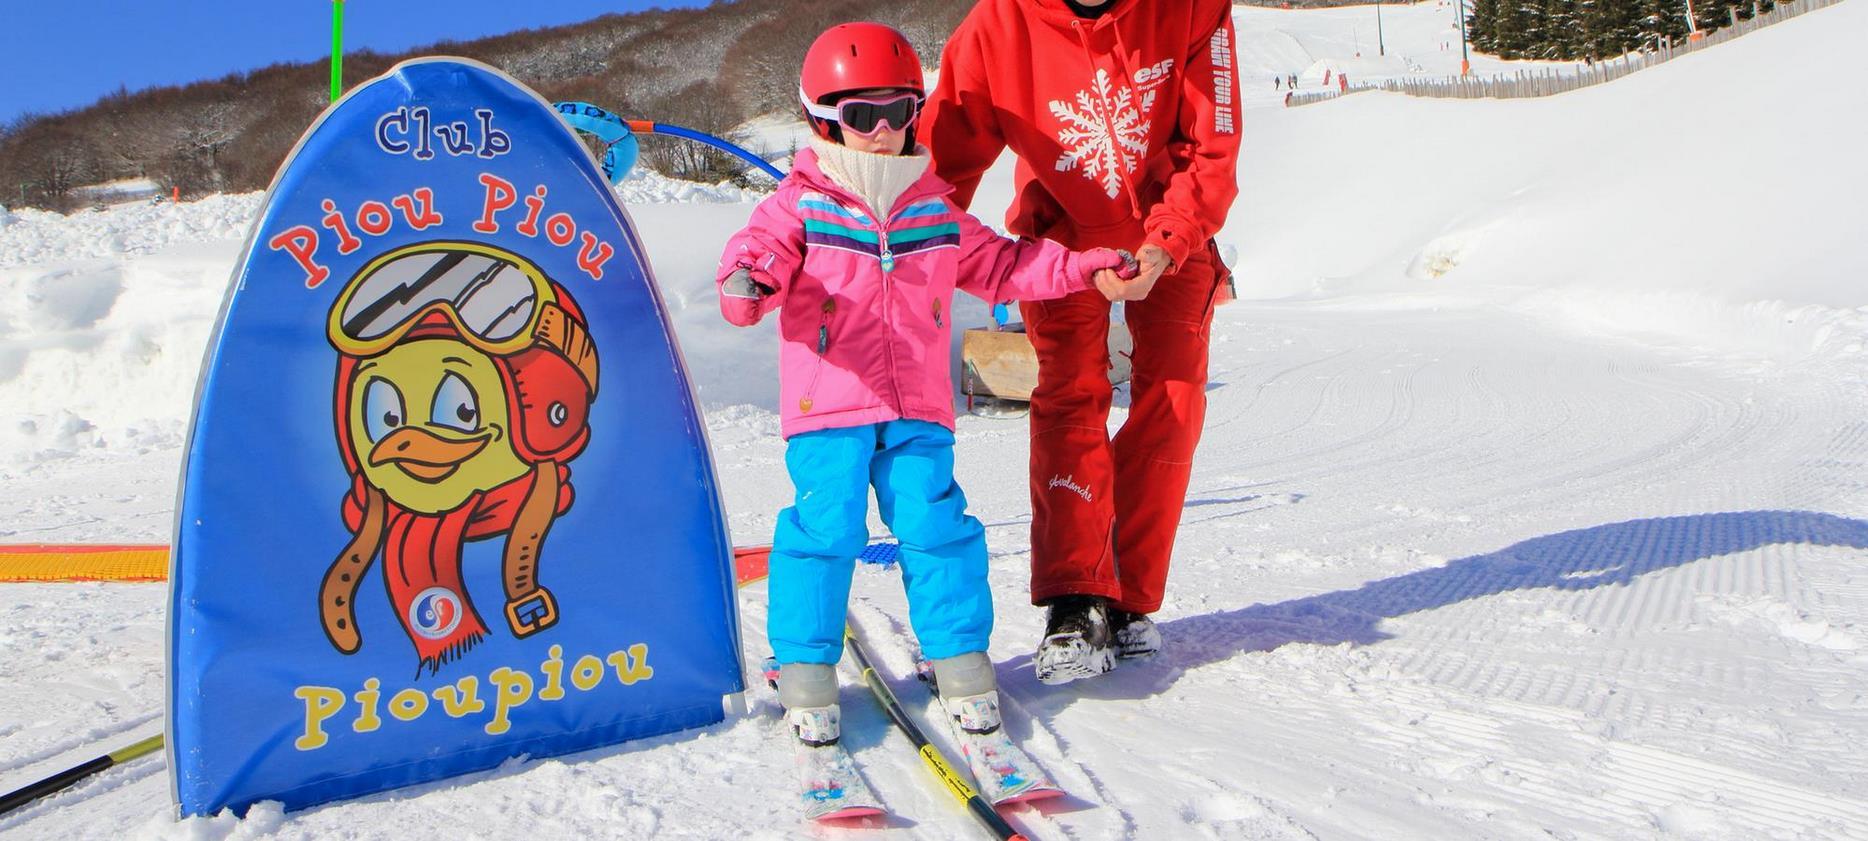 Super Besse - Piou Piou area, introduction to skiing for young children